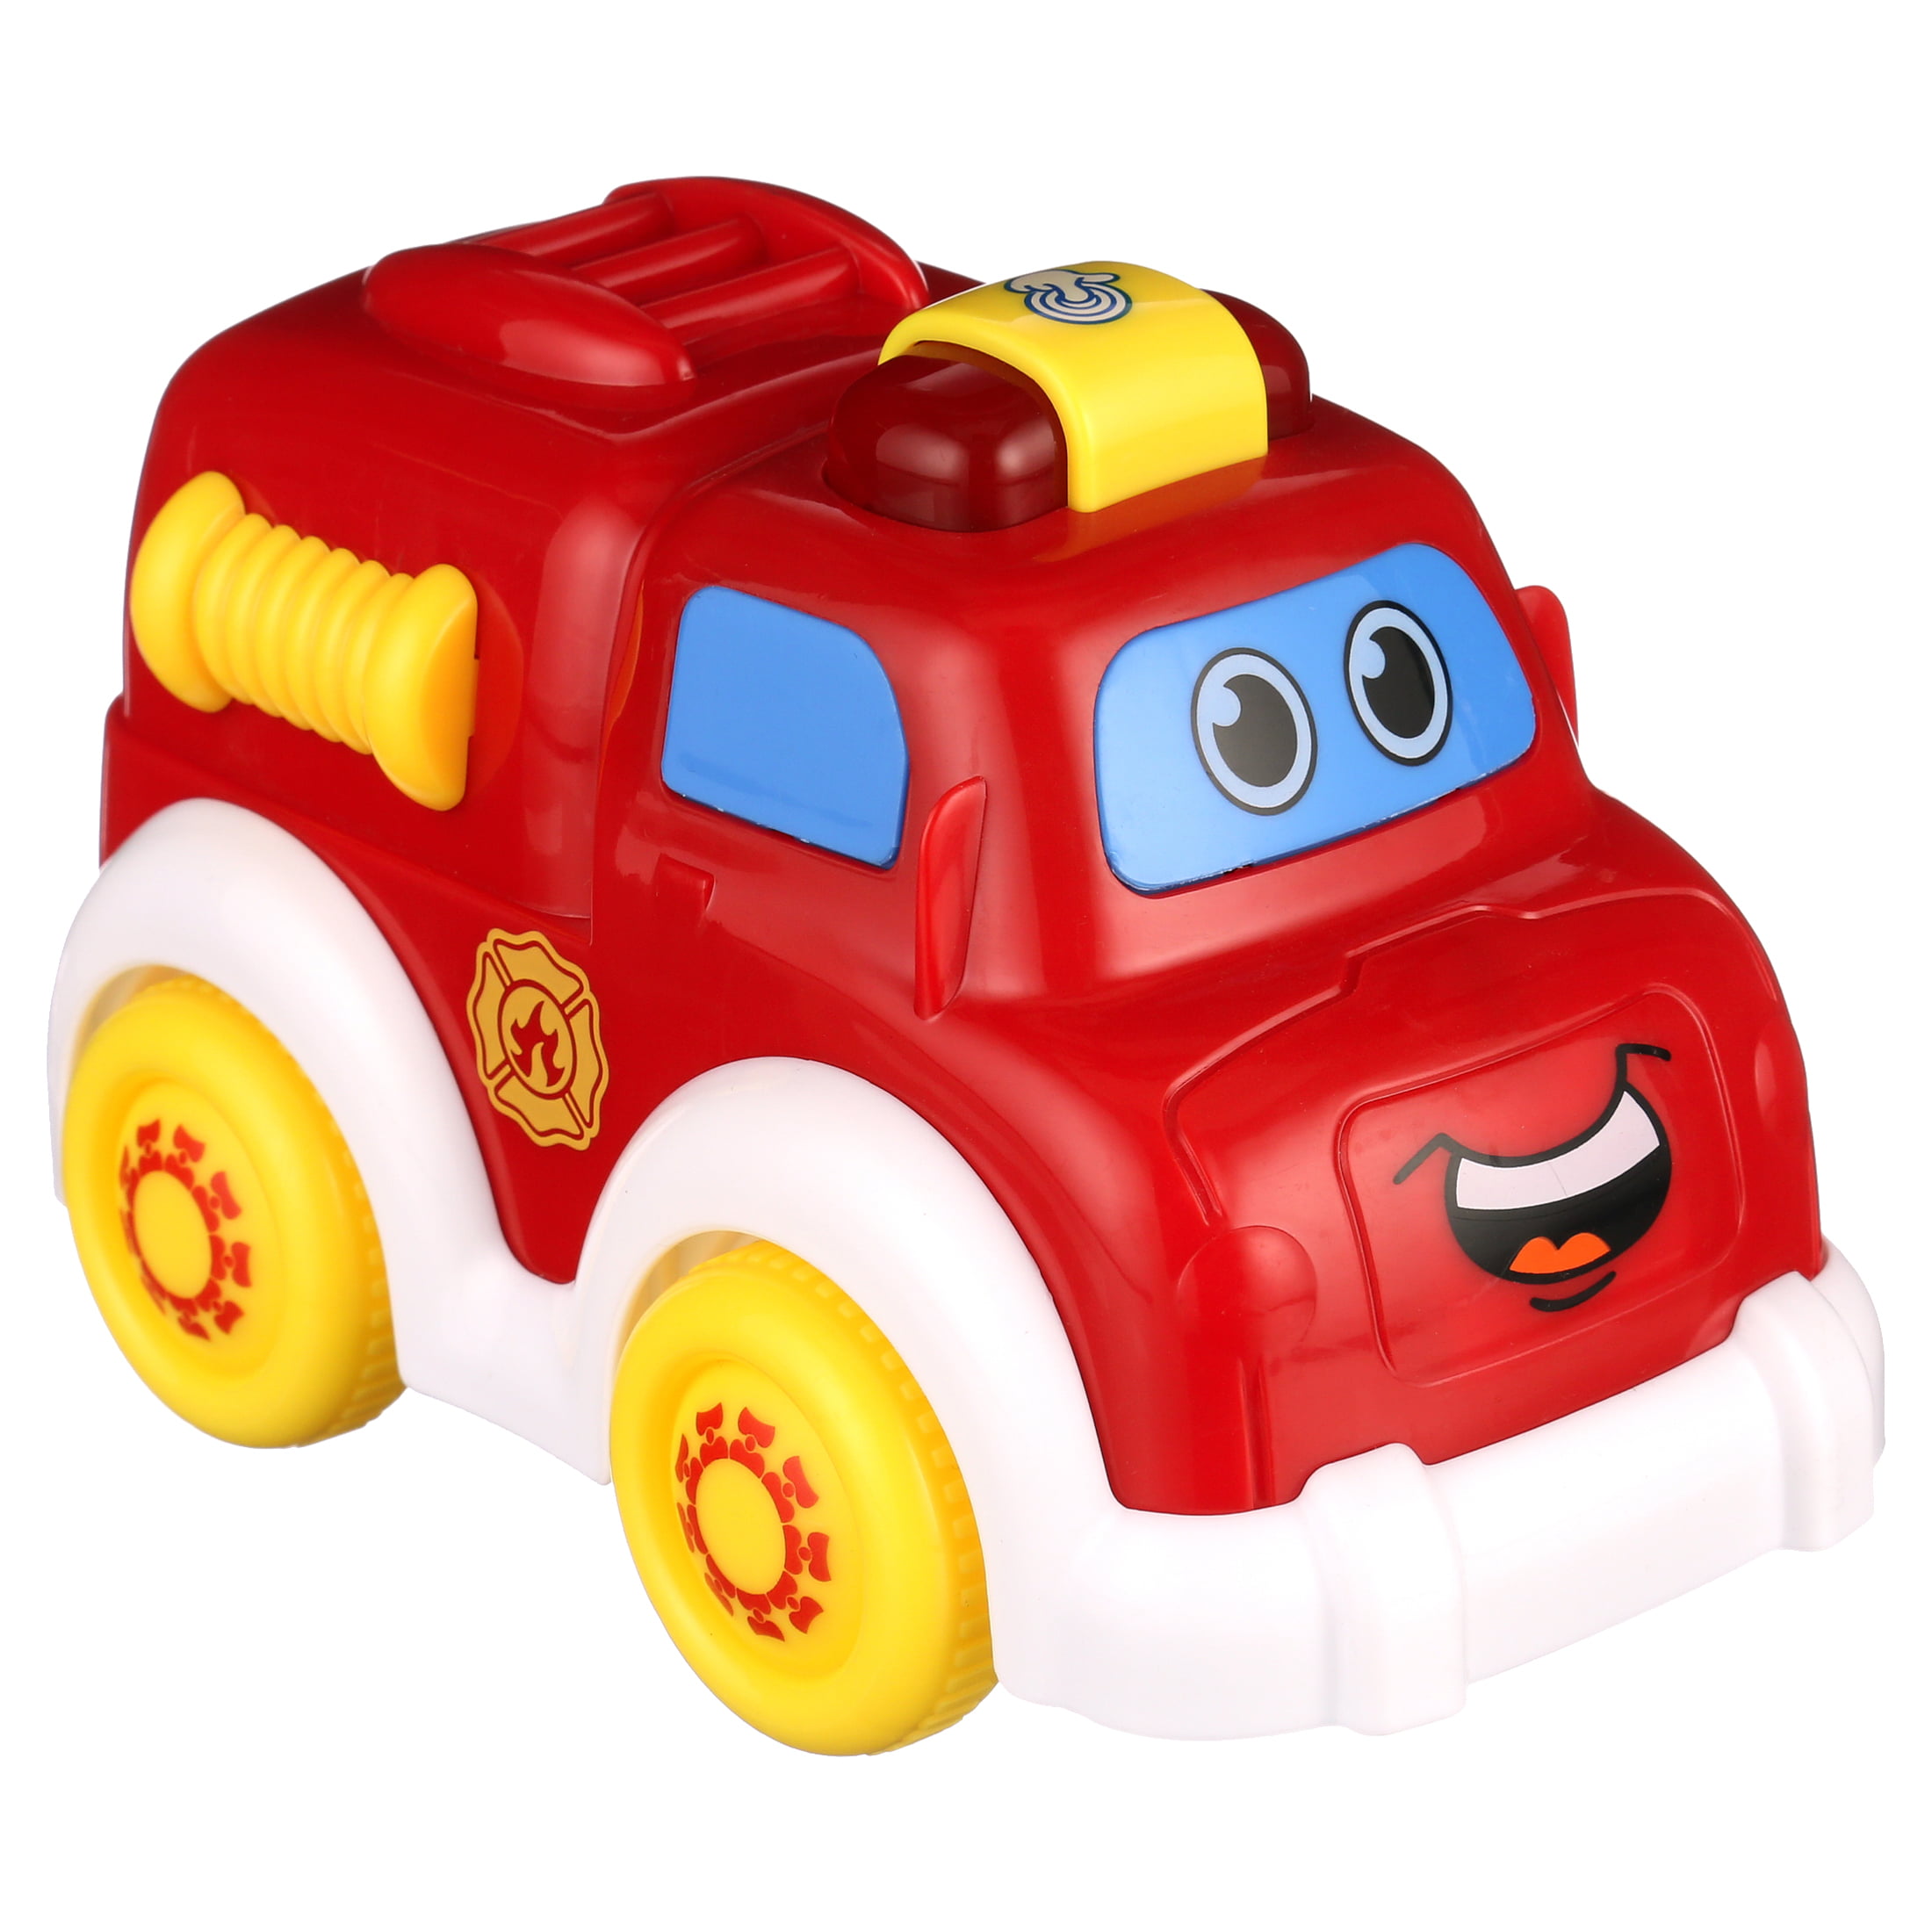 Playgro is Encouraging Imagination with STEM/STEM for a bright future Playgro Lights and Sounds Fire Truck for baby infant toddler children 6383865 Great start for a world of learning 